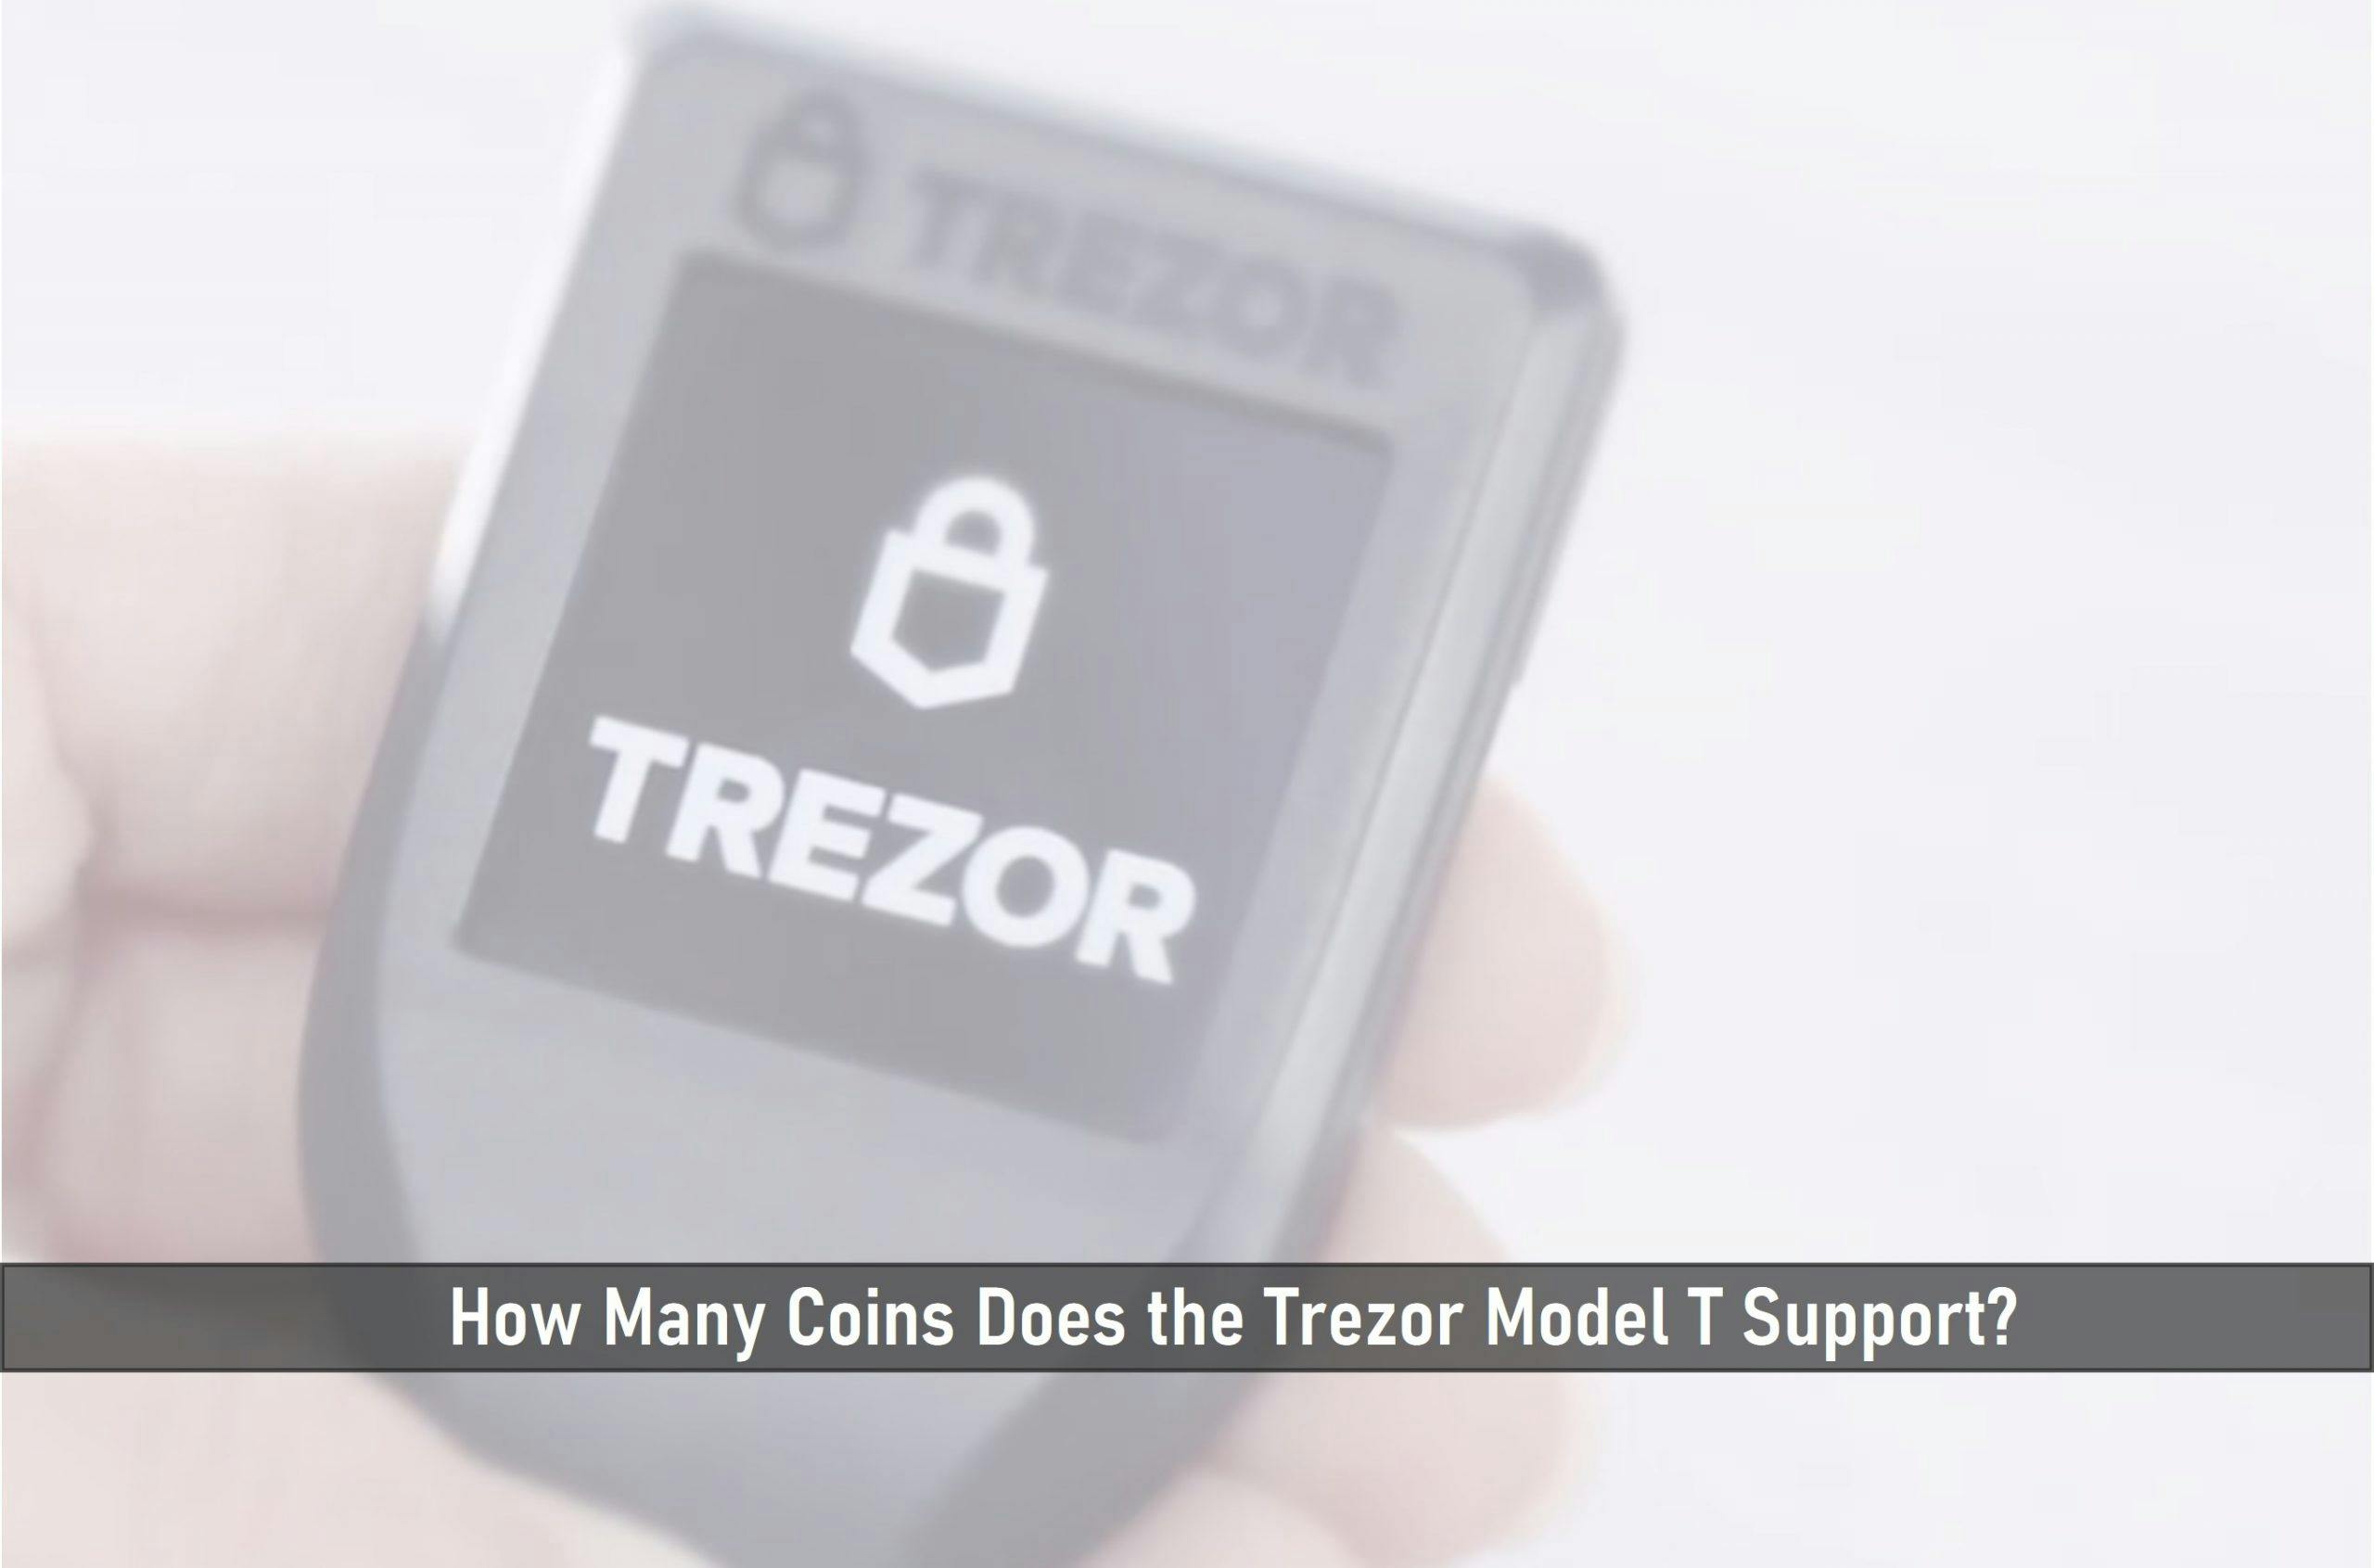 How Many Coins Does the Trezor Model T Support?